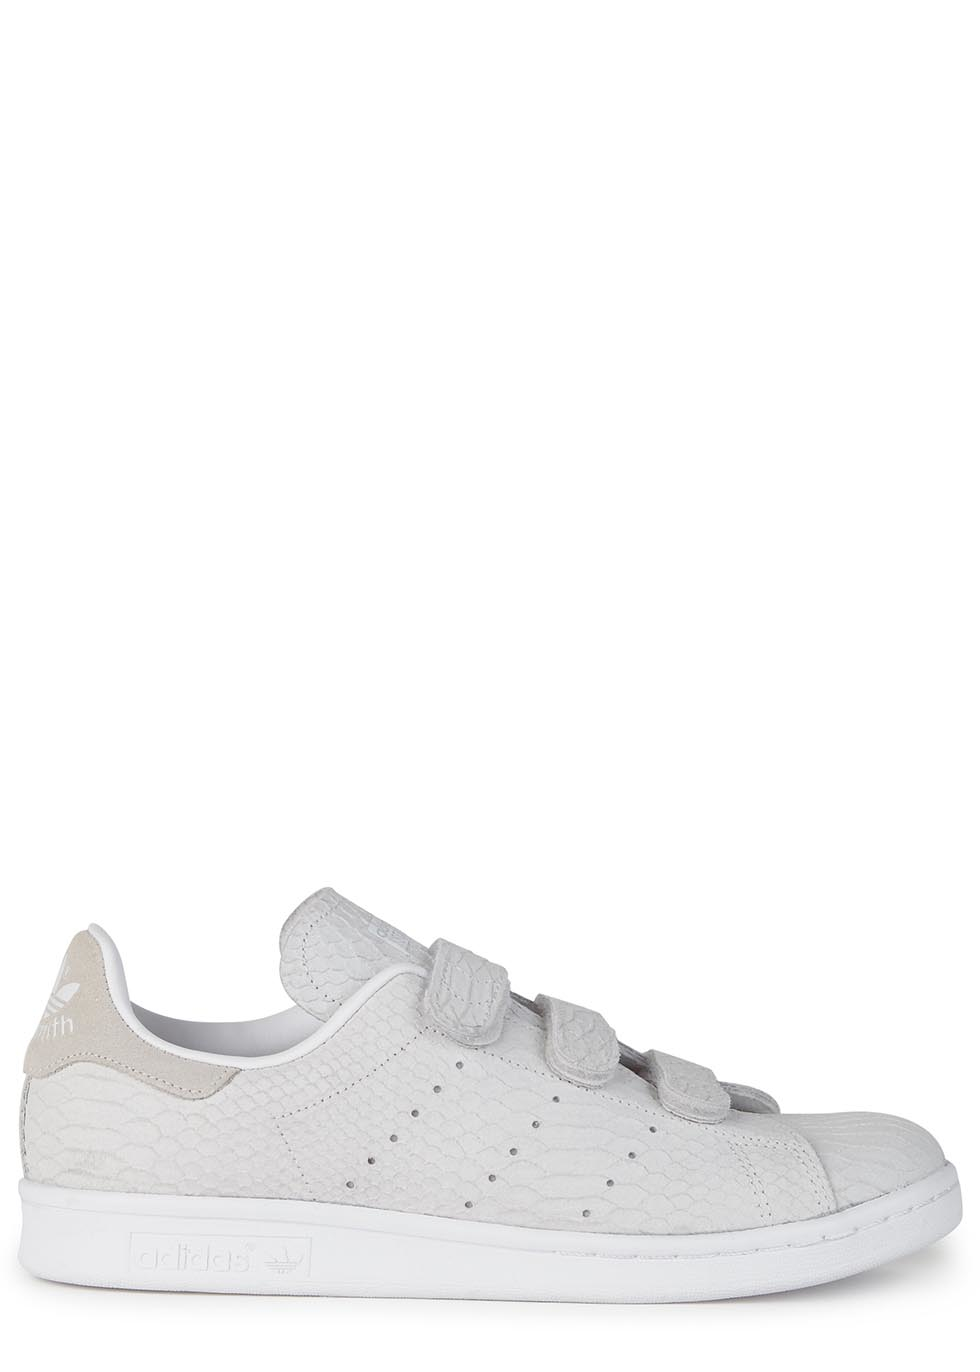 adidas originals velcro stan smith in snake suede trainers